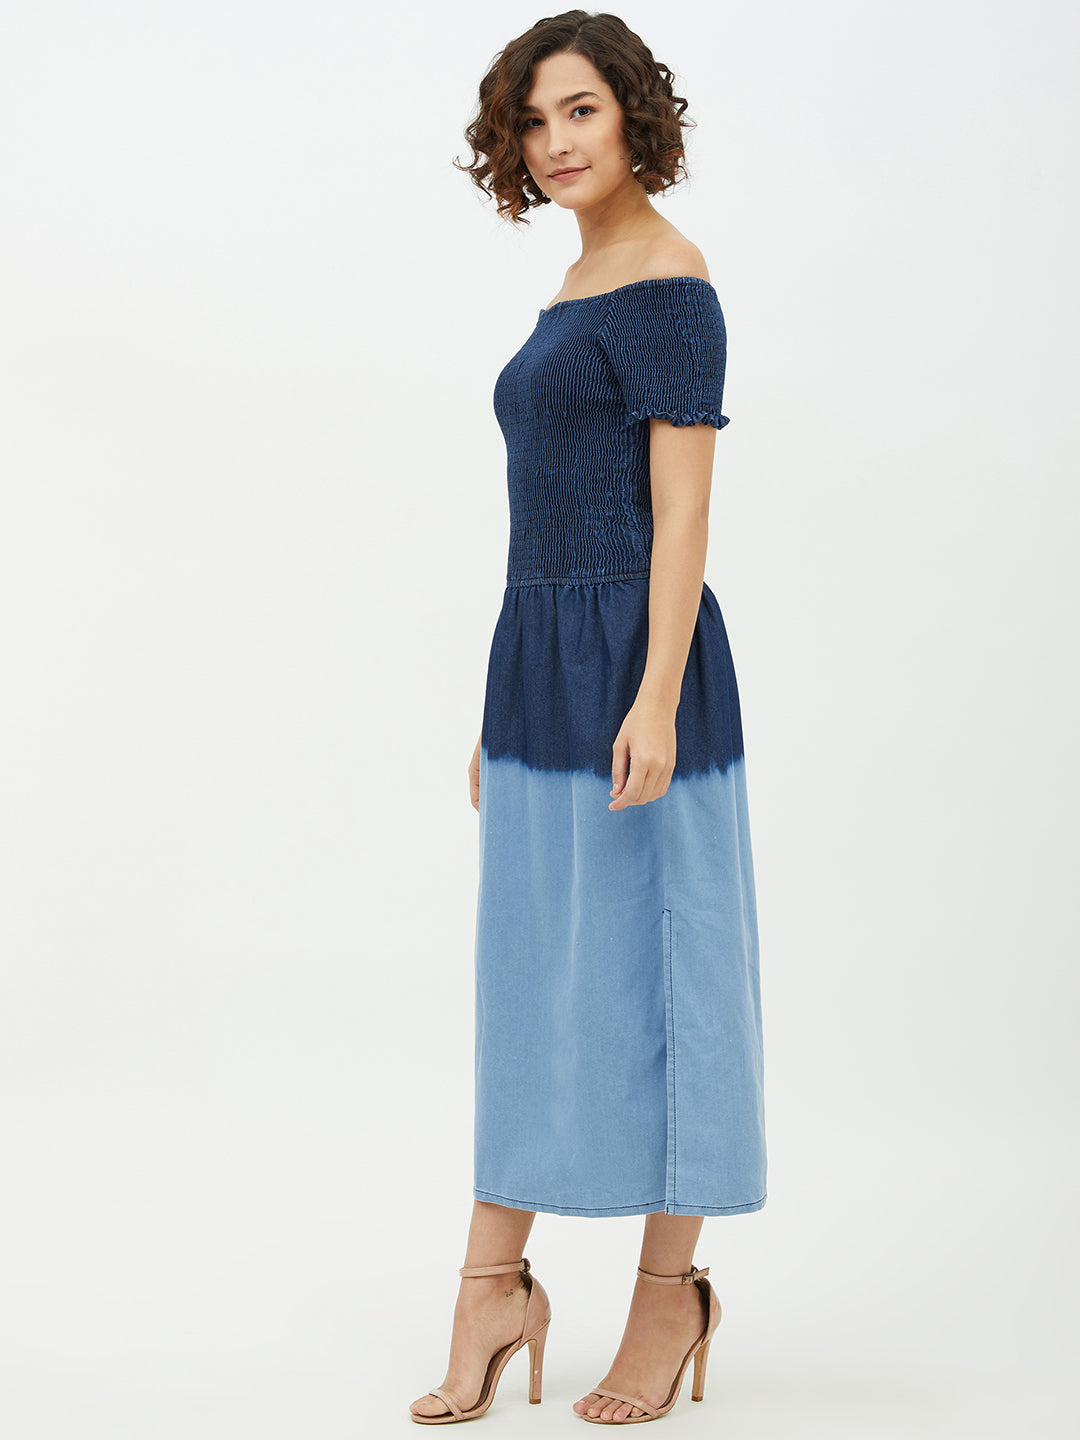 Women's Denim Smocking Dress with Ombre effect